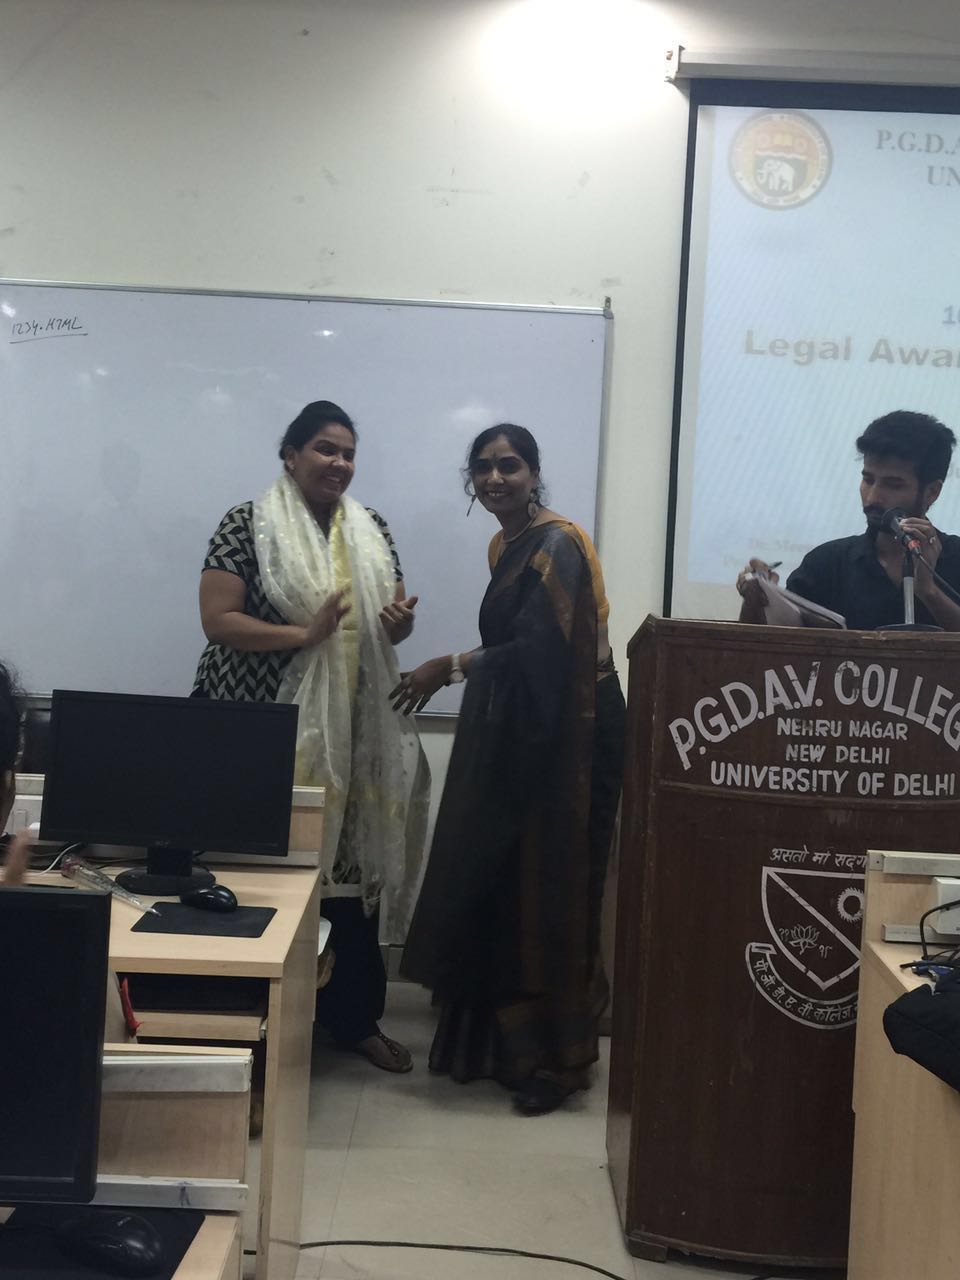 DLSA, SOUTH-EAST ORGANISED ANOTHER LEGAL AWARENESS SESSION  AT PGDAV COLLEGE ON 10.08.2016 AS A PART OF CERTIFICATE COURSE